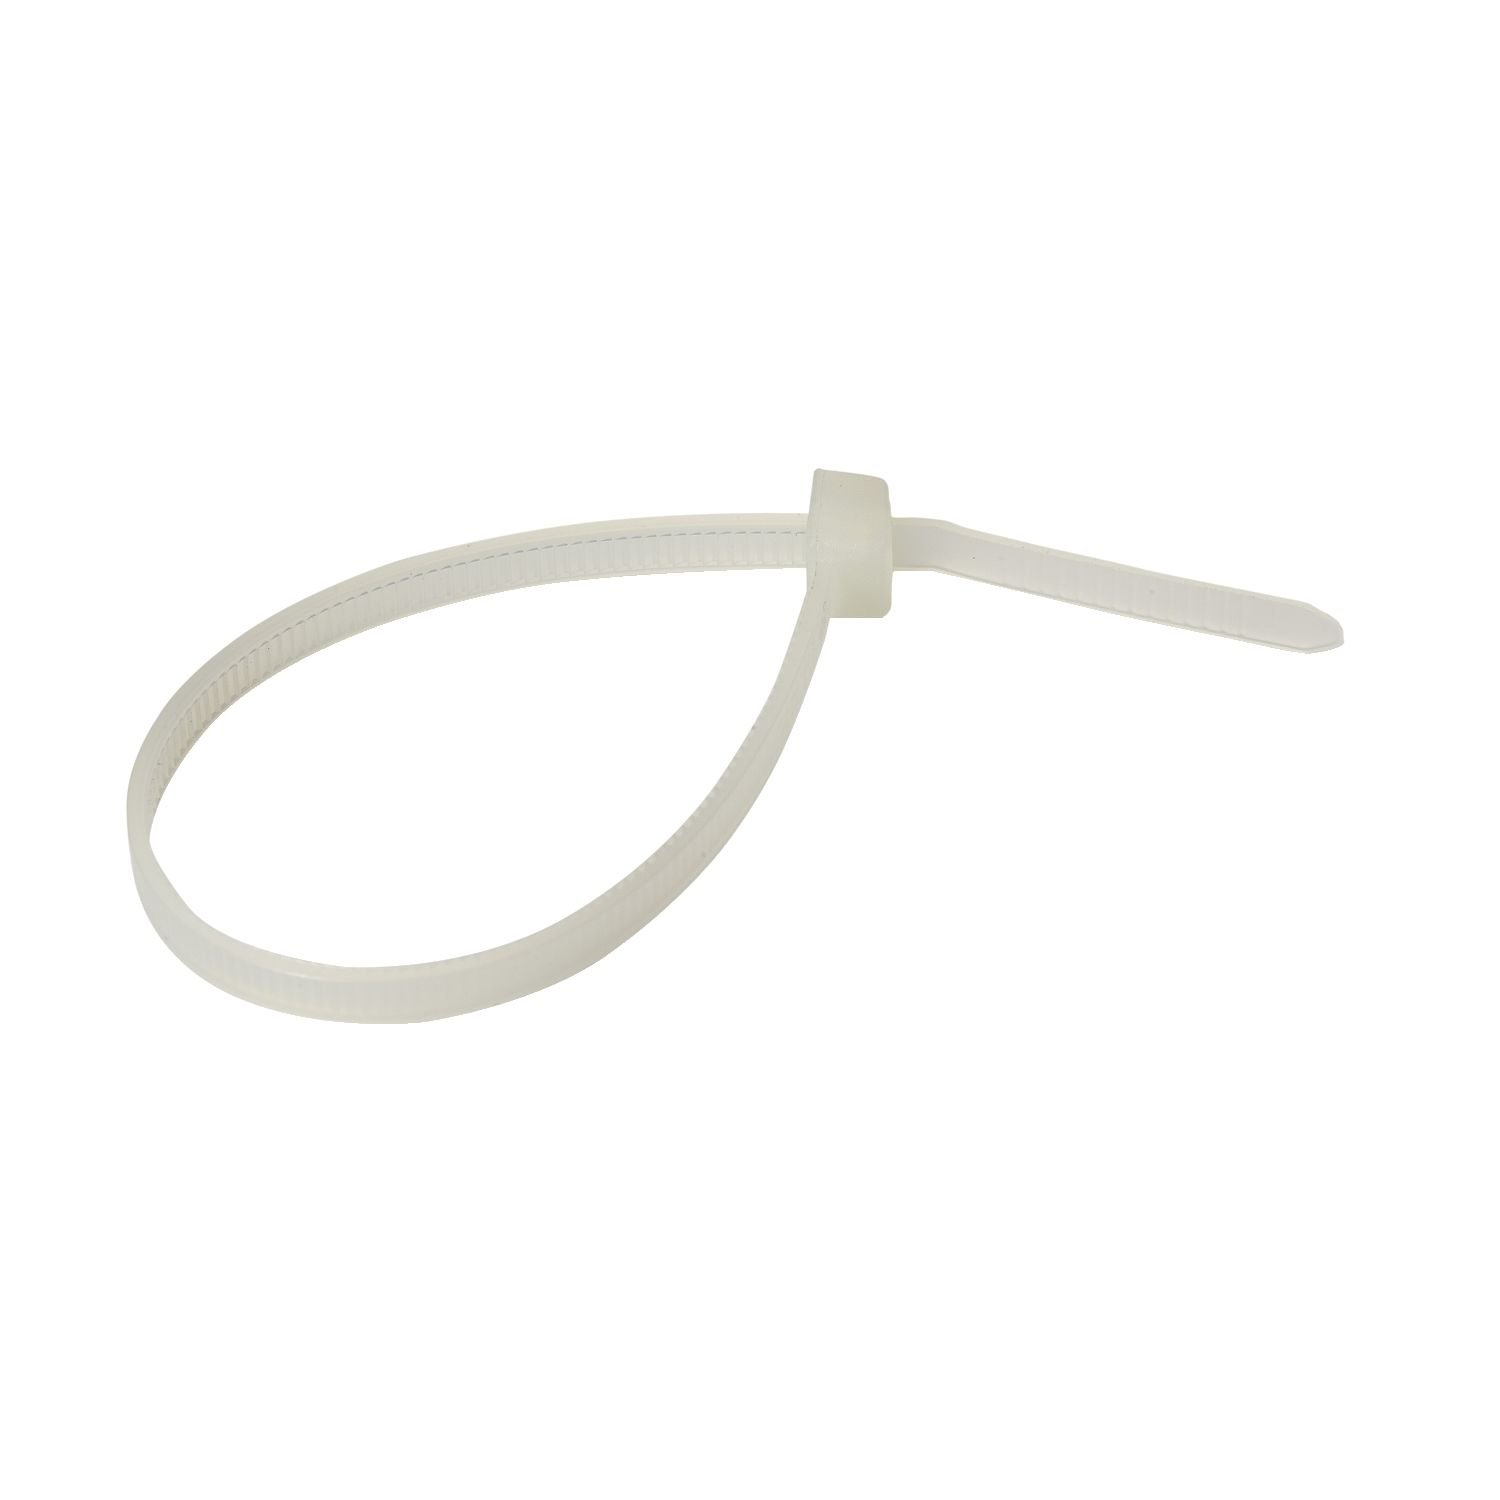 IMT46918 Thorsman - cable tie - natural - 4.8 x 250 mm